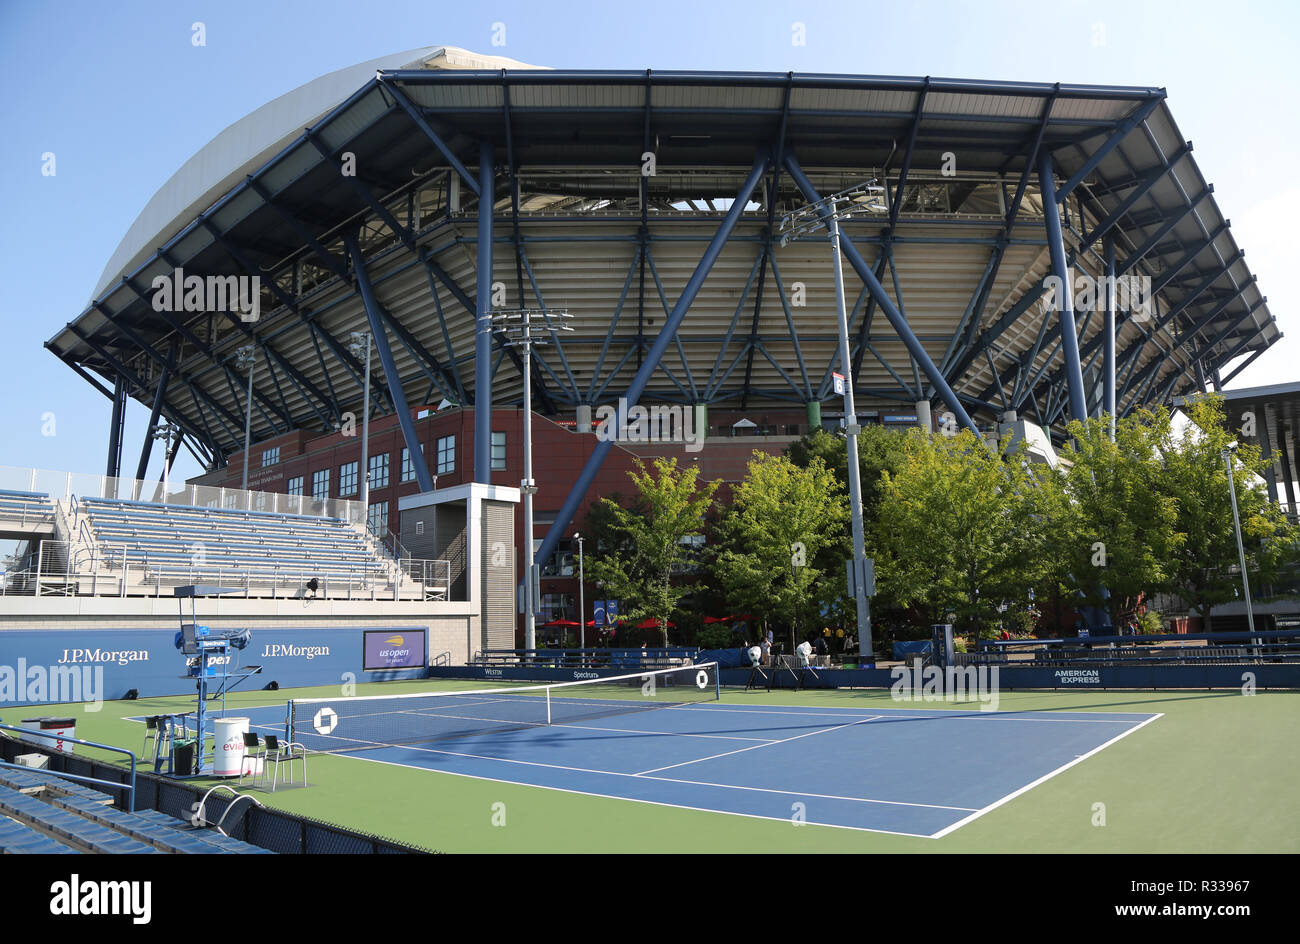 Arthur Ashe Stadium at the Billie Jean King National Tennis Center during  2018 US Open tournament in New York Stock Photo - Alamy